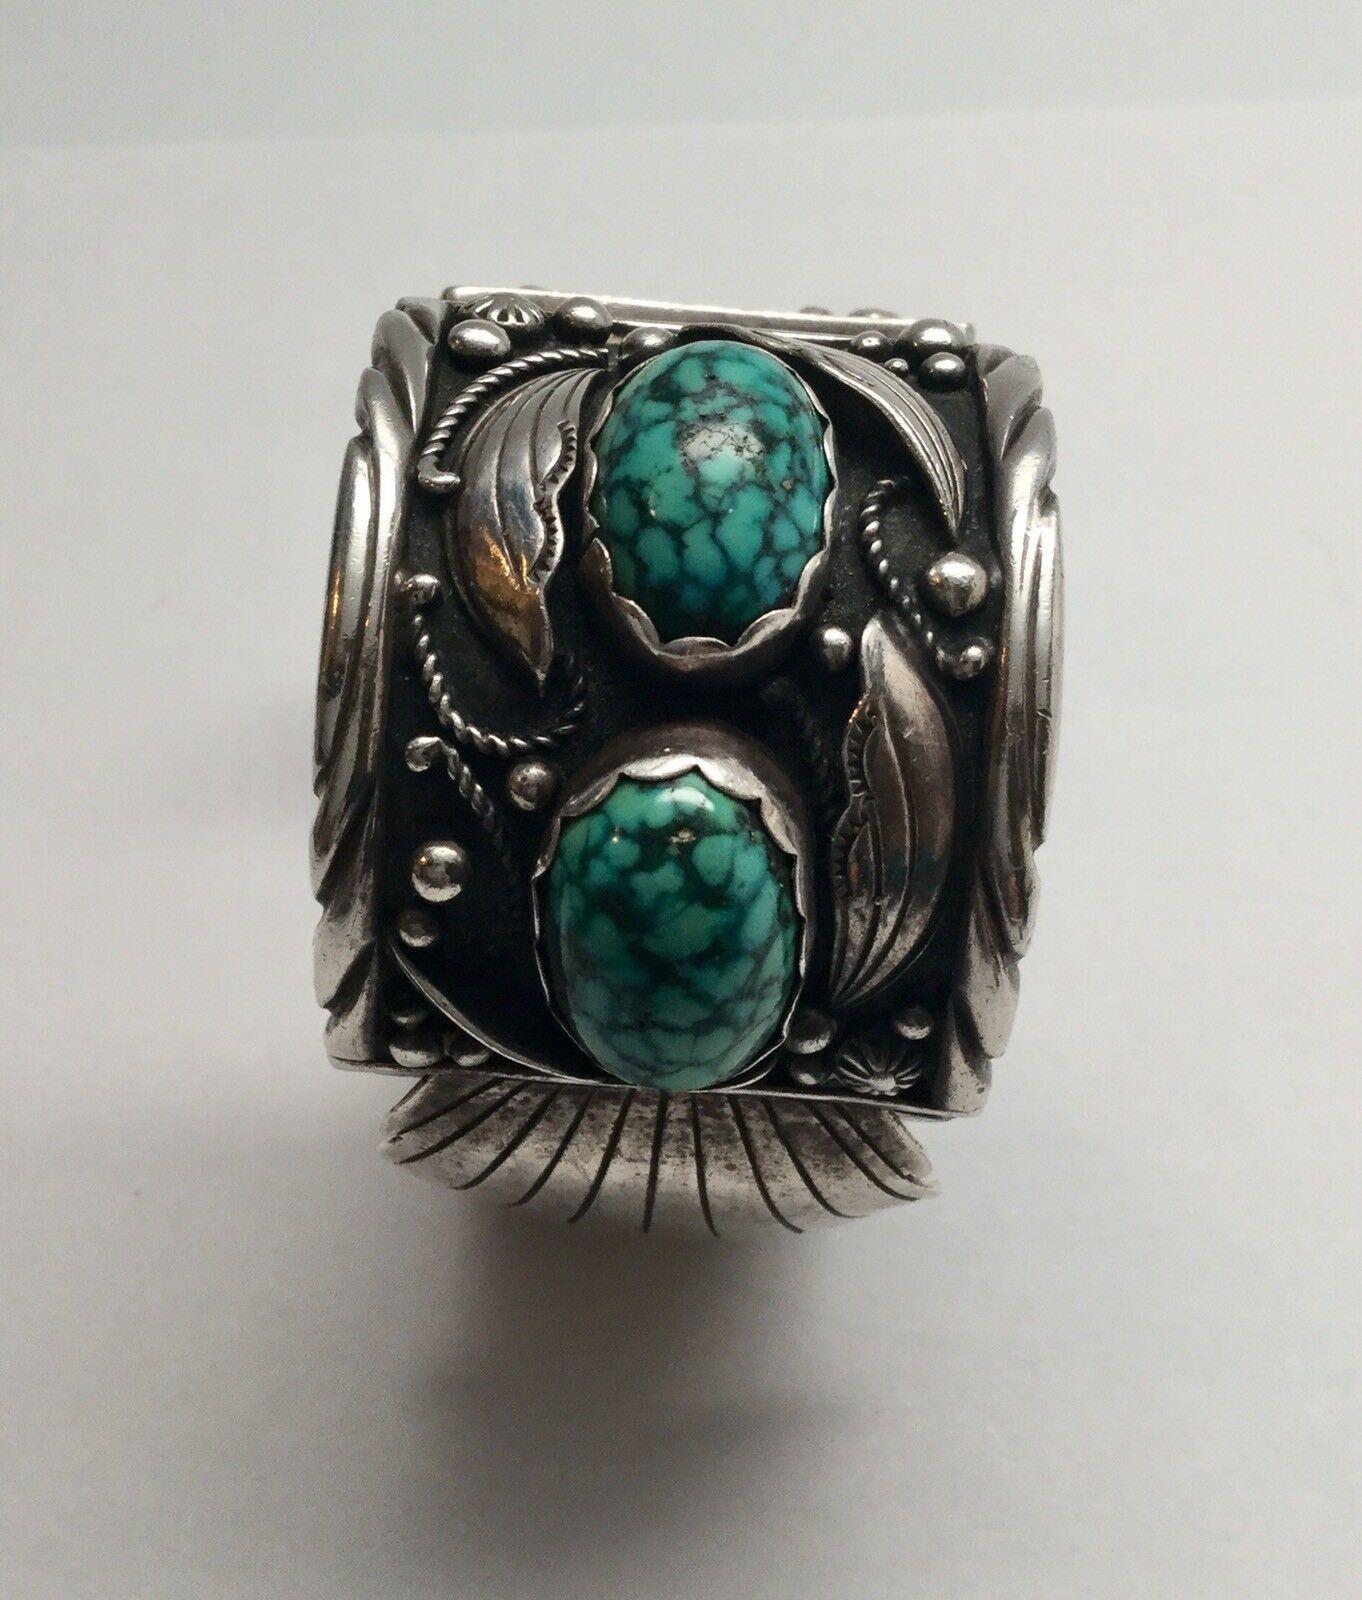 Southwestern Les Baker Shop sterling silver turquoise watch cuff.

Marked:  LB with stamped eagle in between, Sterling.

Measures: 6